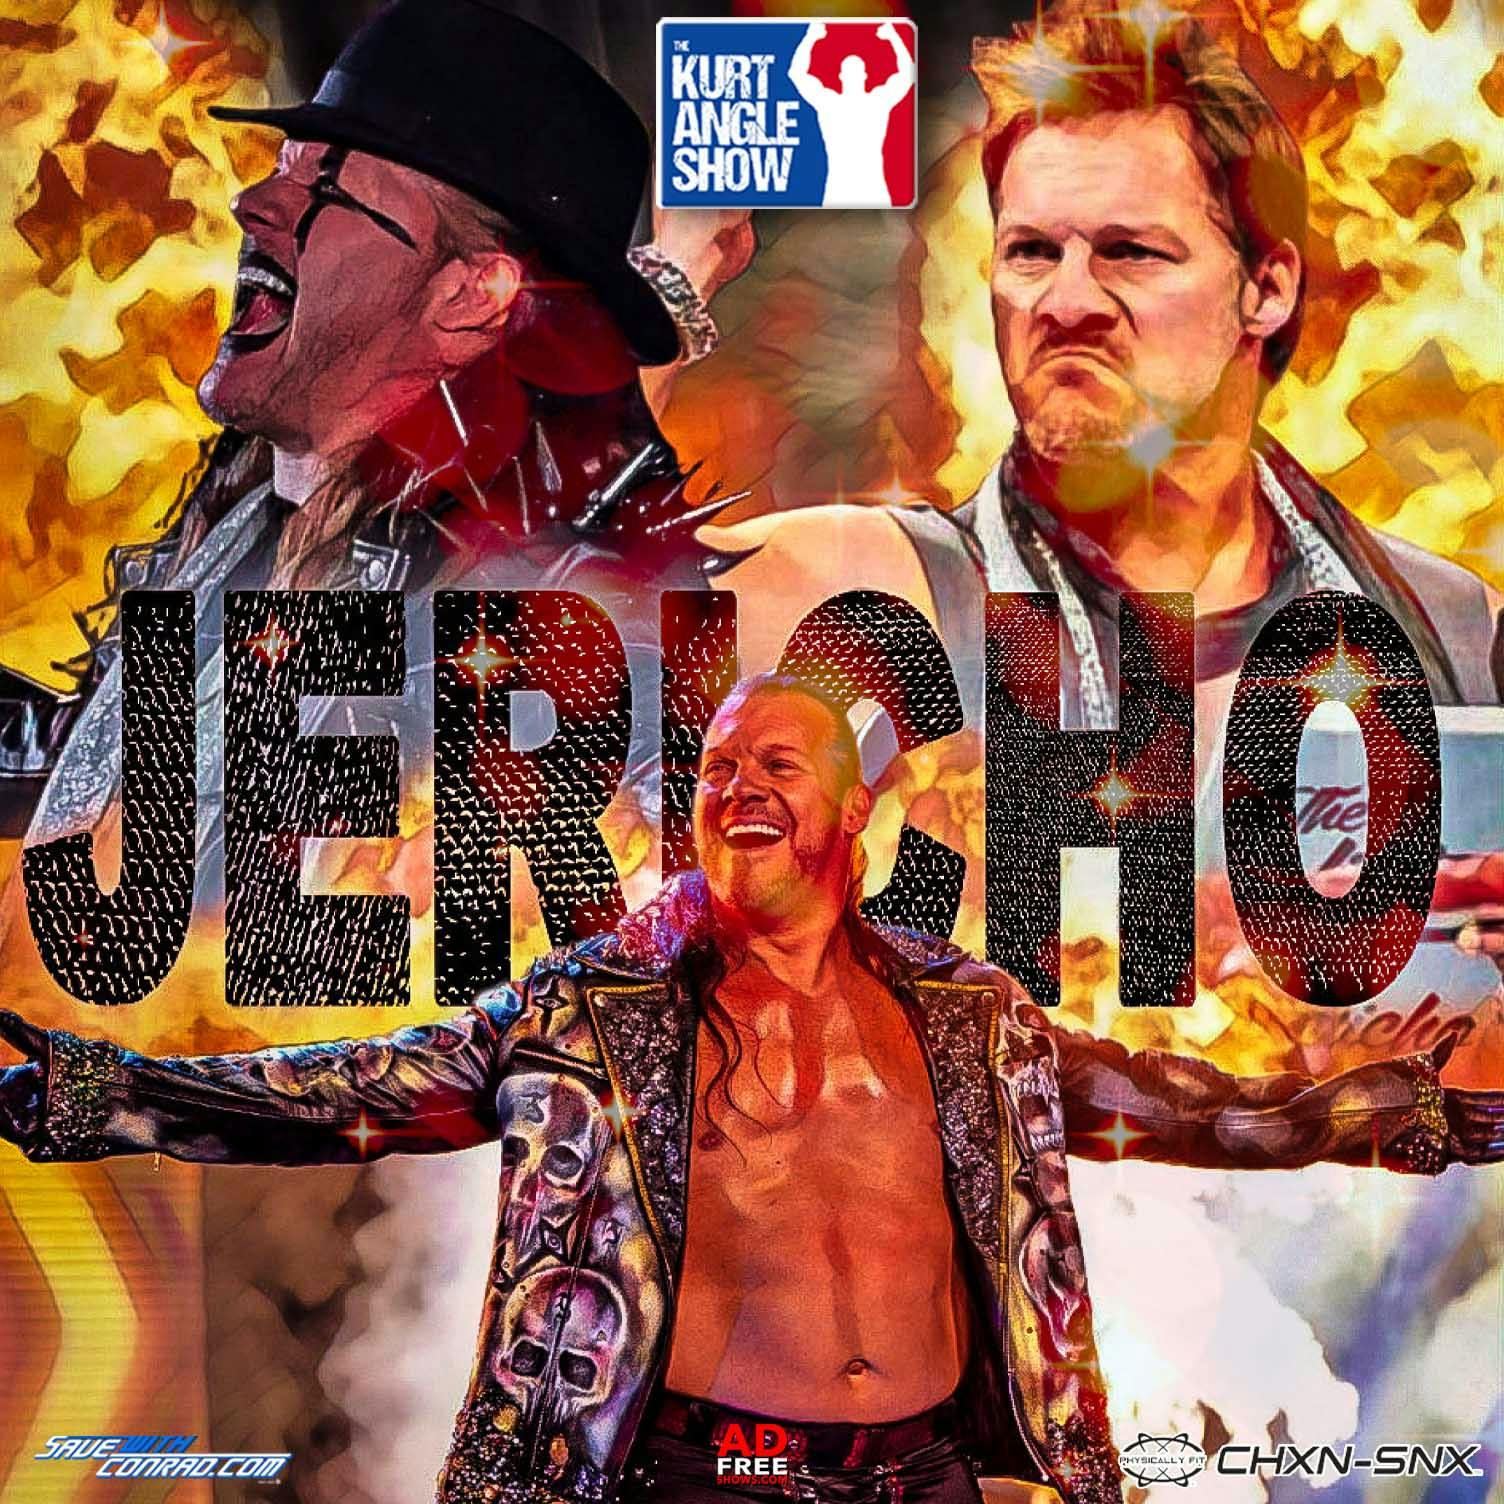 Episode 58: The Chris Jericho Interview